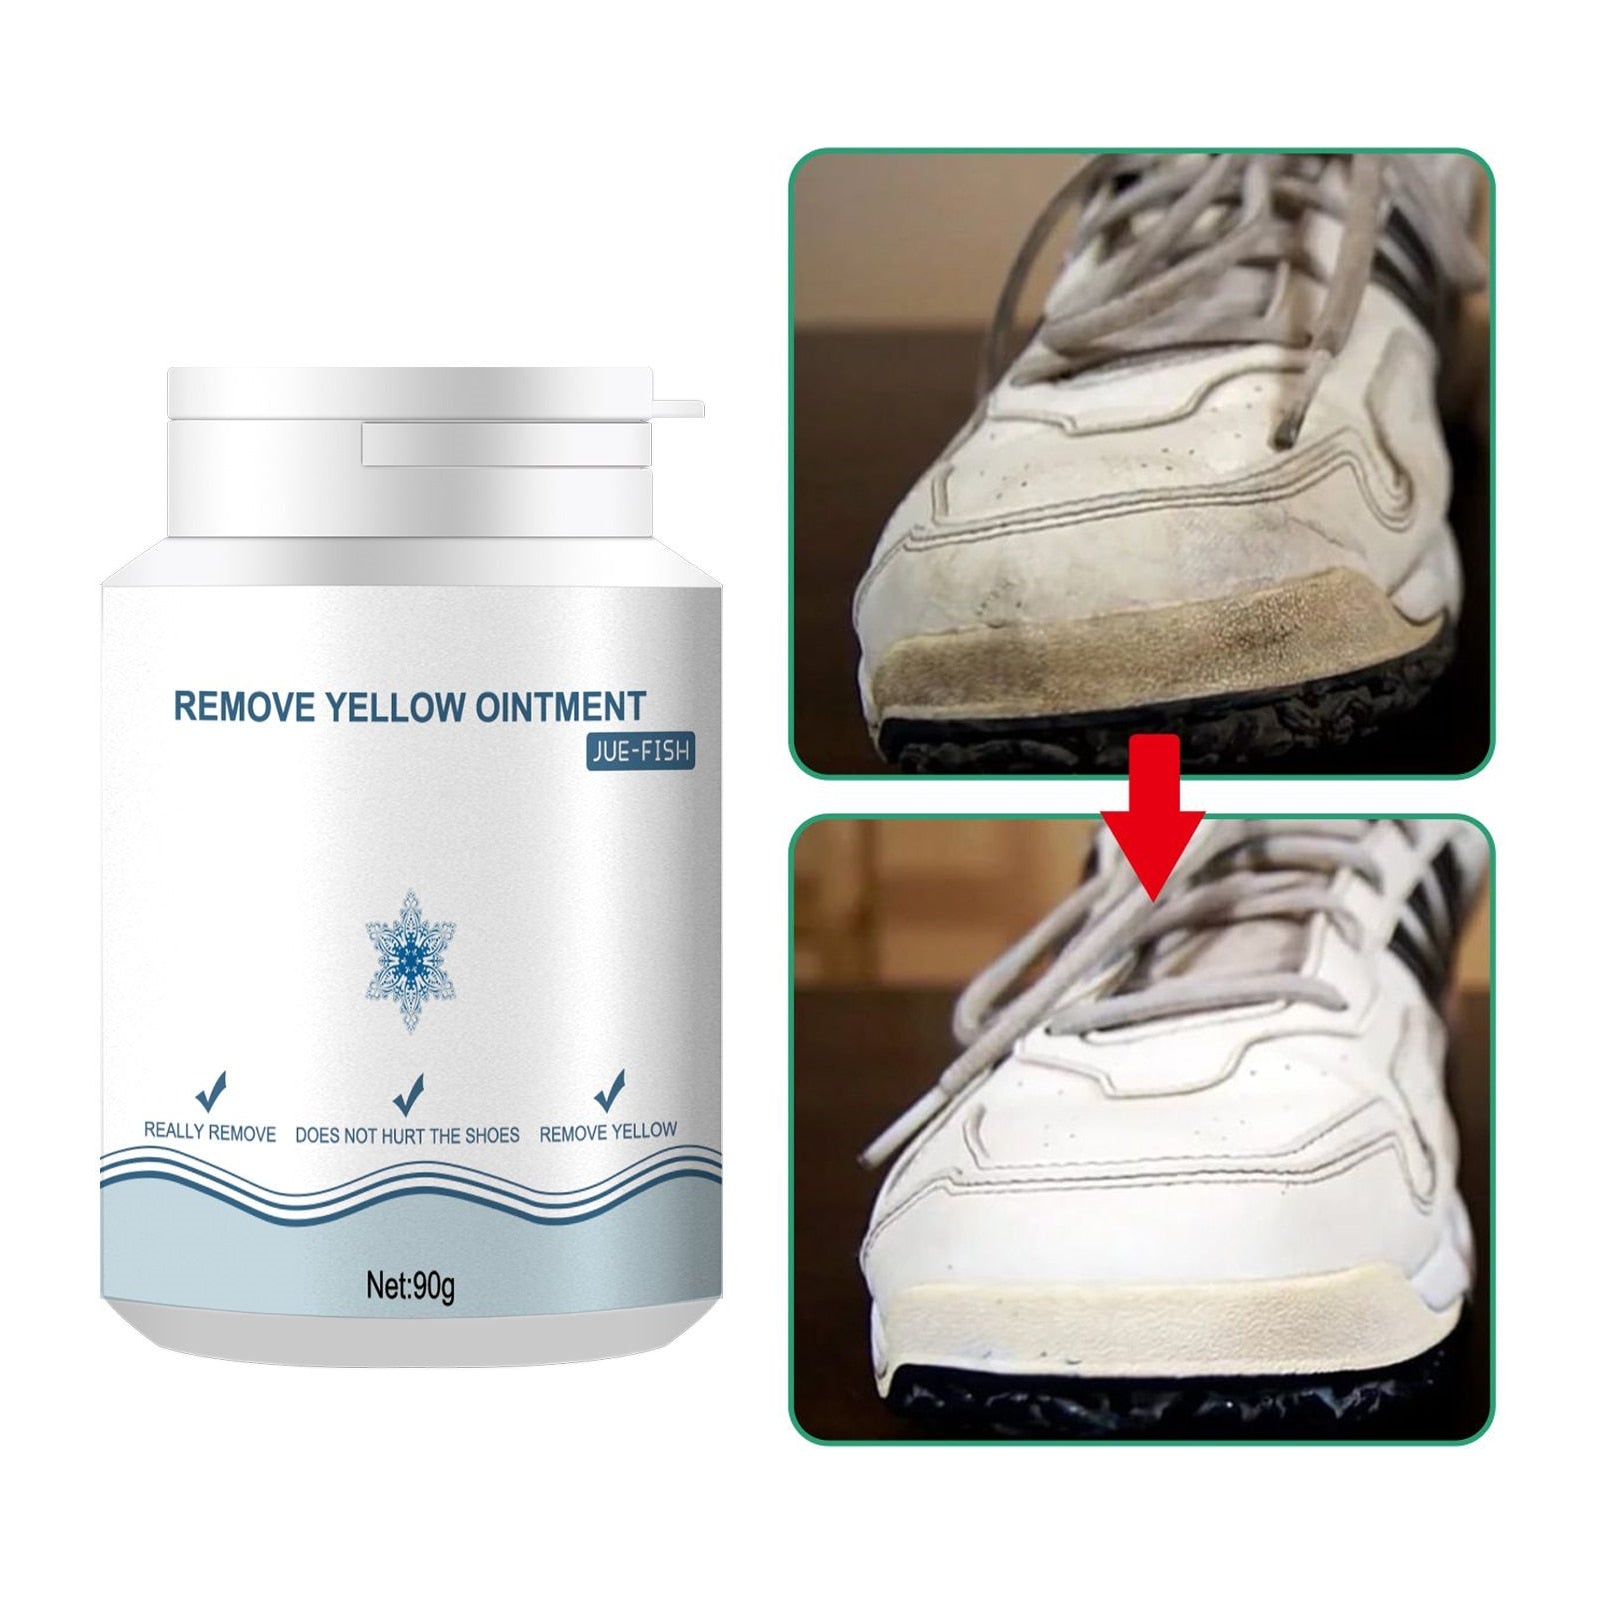 White Shoes Cleaner Remove Yellow Ointment Foam Cleaner Sneakers Decontamination Shoes Edge Cleaning White Shoe Stains Remover